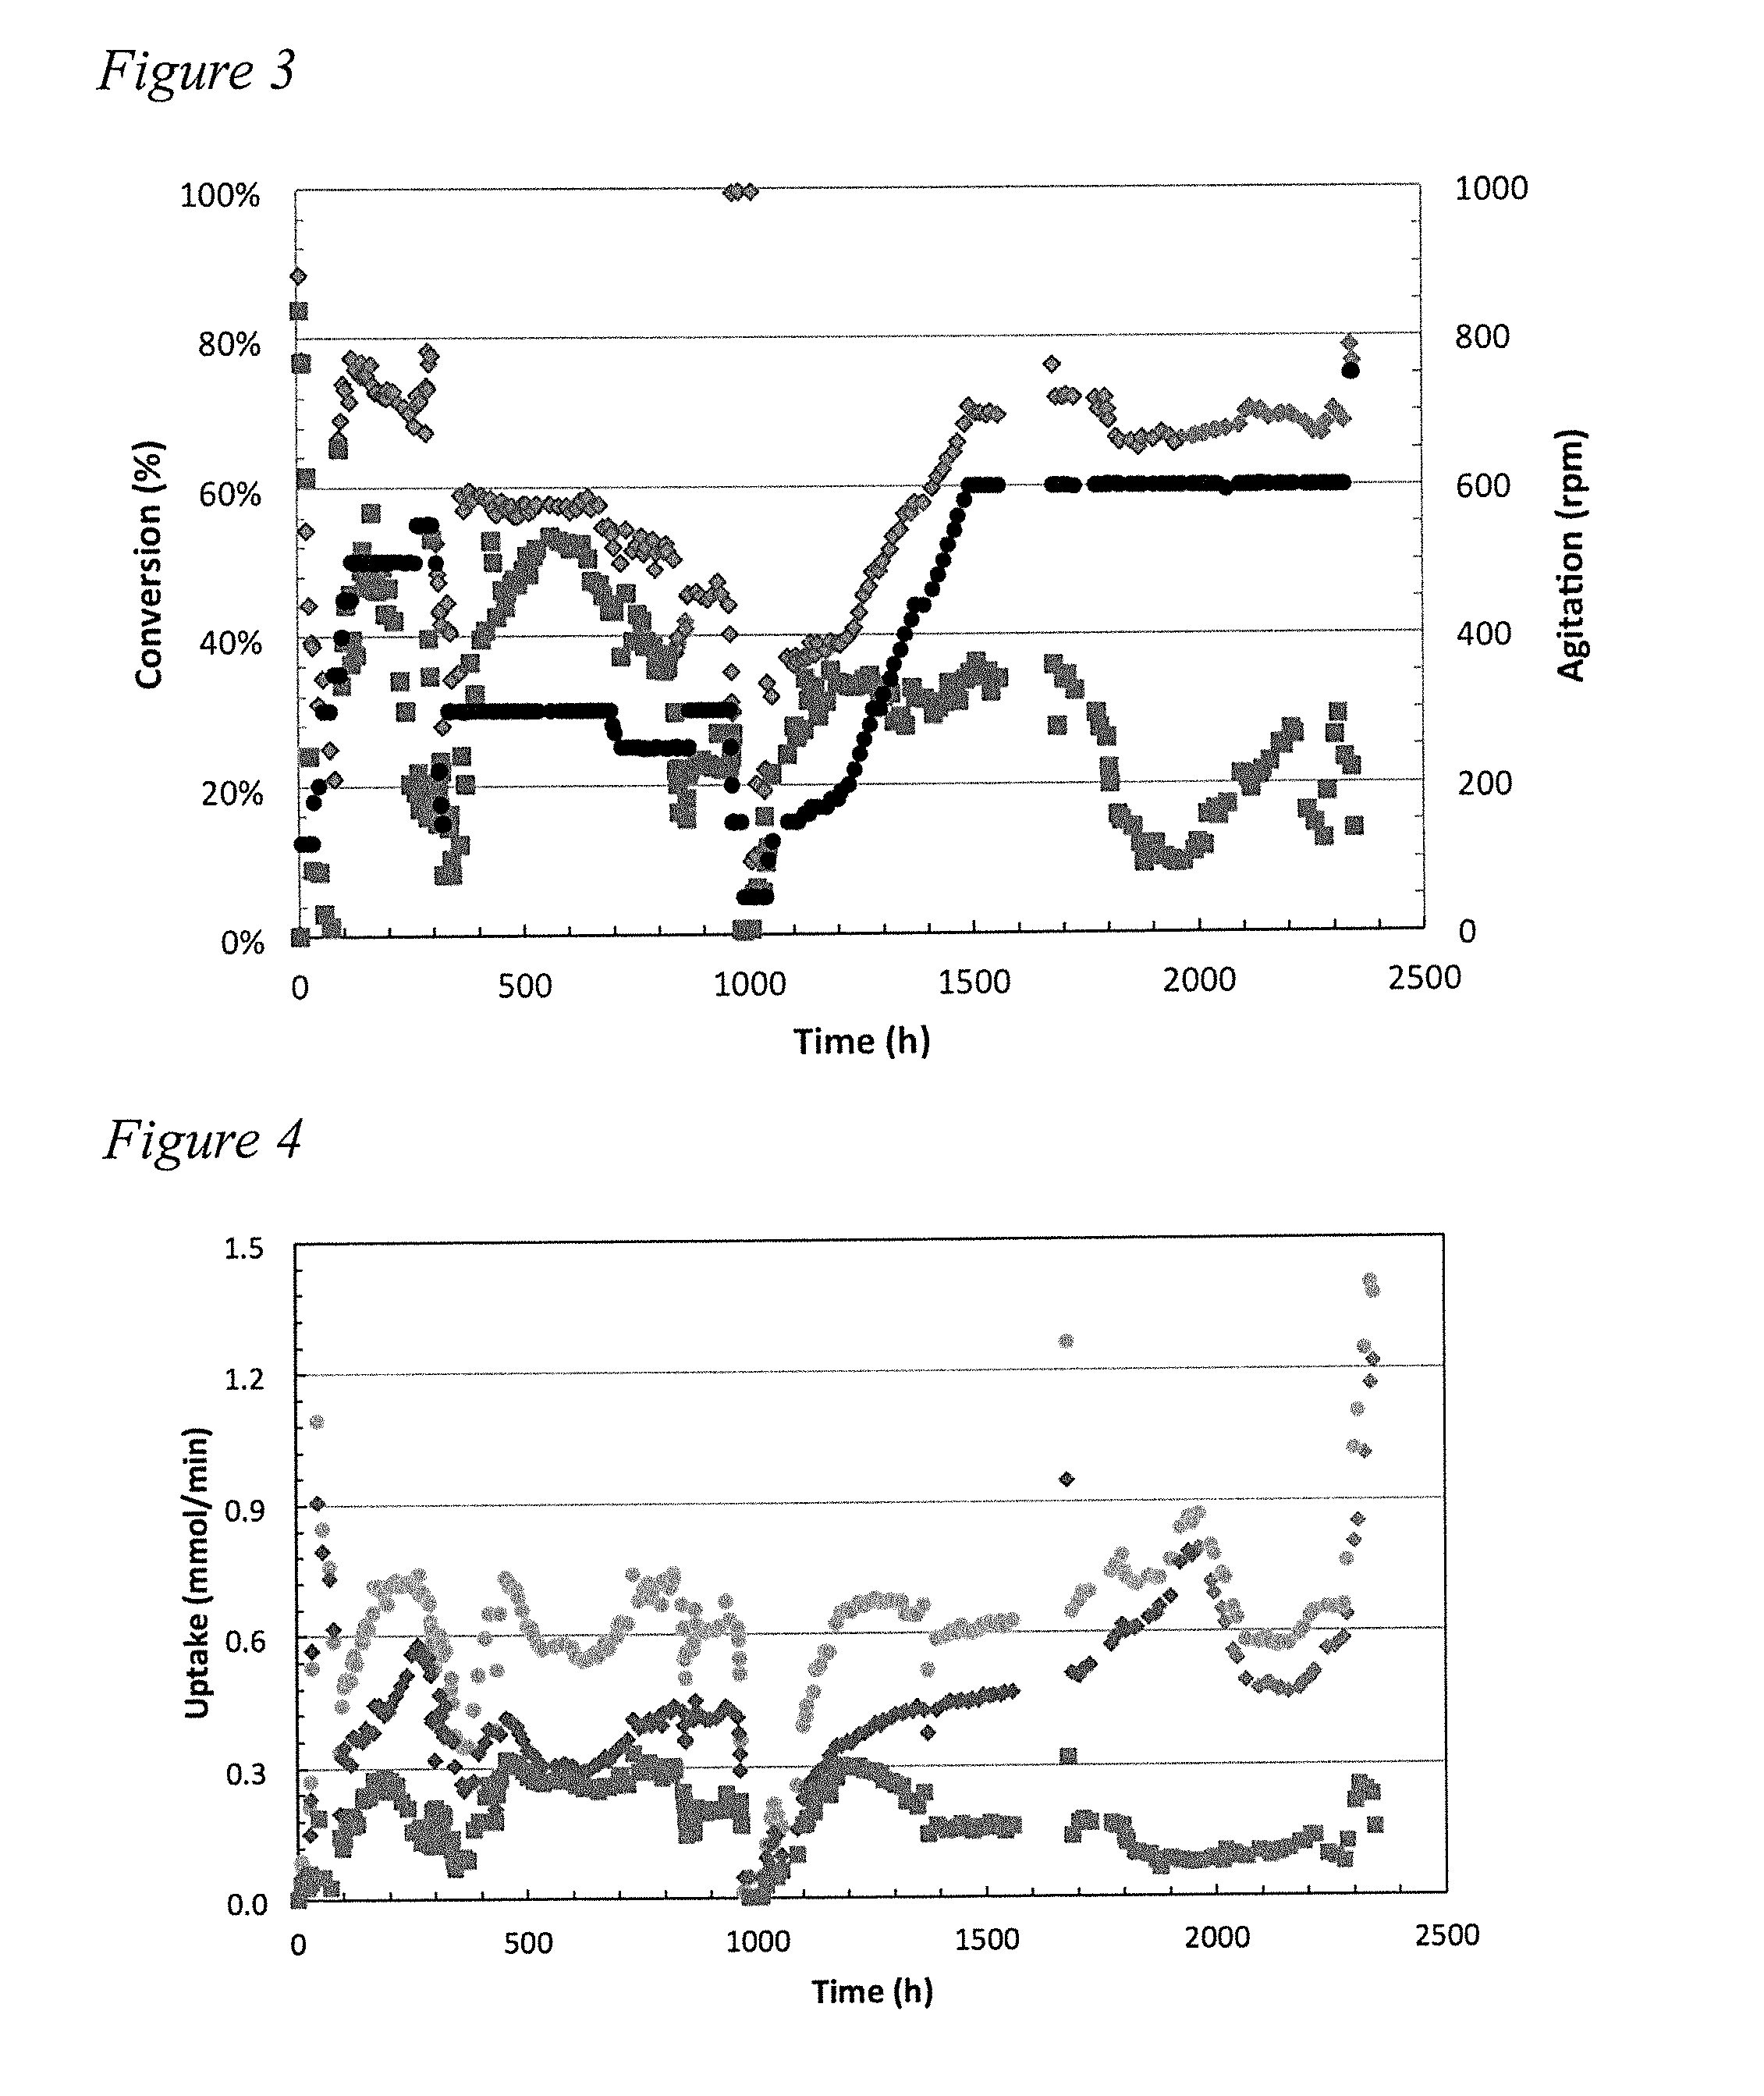 SYSTEM AND METHOD FOR FEEDBACK CONTROL OF GAS SUPPLY FOR ETHANOL PRODUCTION VIA SYNGAS FERMENTATION USING pH AS A KEY CONTROL INDICATOR